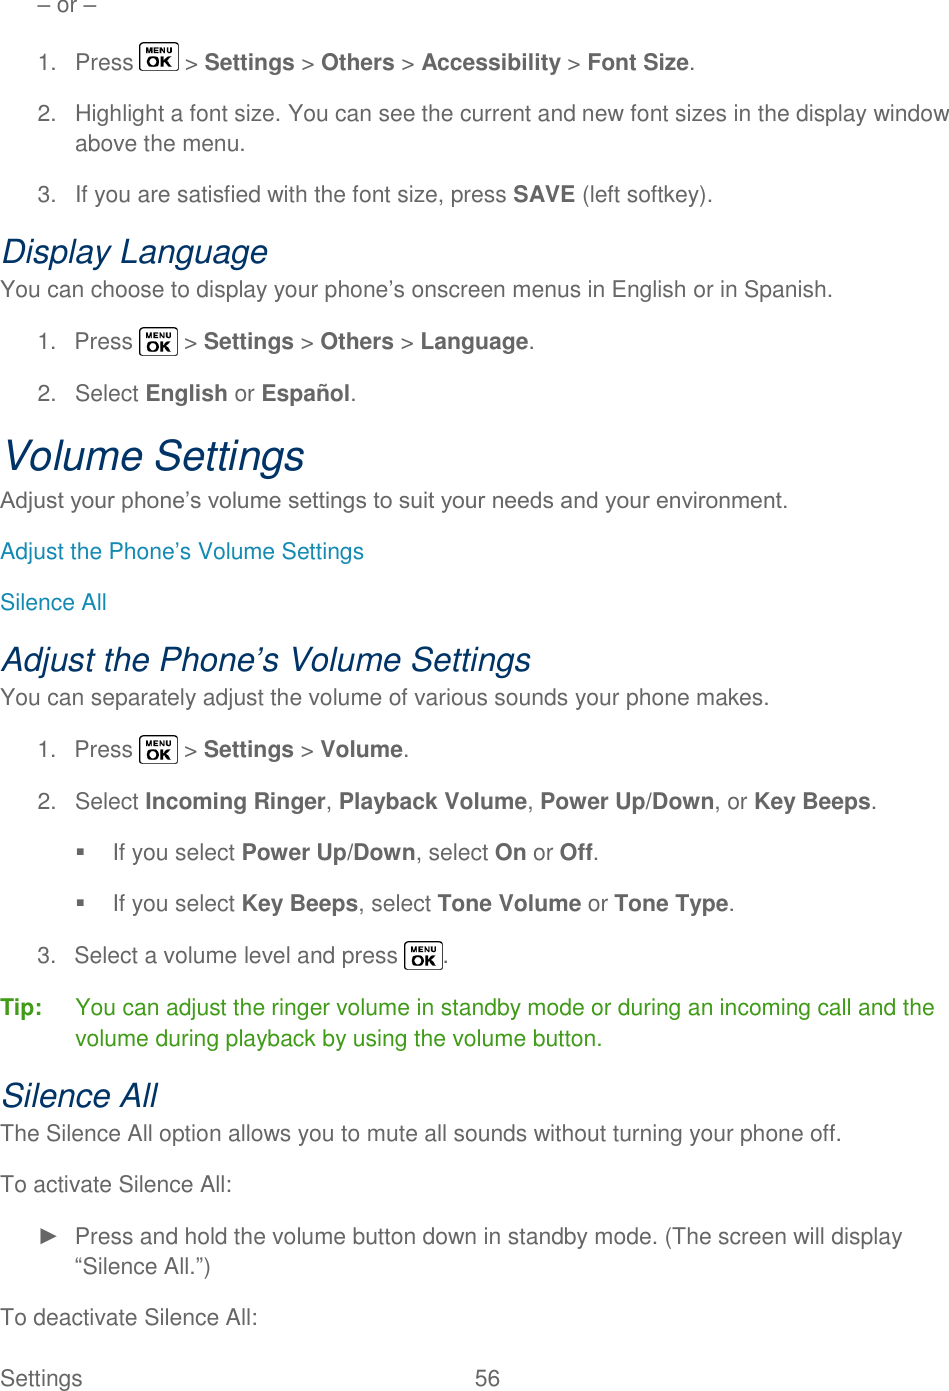  Settings  56   – or – 1.  Press   &gt; Settings &gt; Others &gt; Accessibility &gt; Font Size. 2.  Highlight a font size. You can see the current and new font sizes in the display window above the menu. 3.  If you are satisfied with the font size, press SAVE (left softkey). Display Language You can choose to display your phone‘s onscreen menus in English or in Spanish. 1.  Press   &gt; Settings &gt; Others &gt; Language. 2.  Select English or Español. Volume Settings Adjust your phone‘s volume settings to suit your needs and your environment. Adjust the Phone‘s Volume Settings Silence All Adjust the Phone’s Volume Settings You can separately adjust the volume of various sounds your phone makes. 1.  Press   &gt; Settings &gt; Volume. 2.  Select Incoming Ringer, Playback Volume, Power Up/Down, or Key Beeps.   If you select Power Up/Down, select On or Off.   If you select Key Beeps, select Tone Volume or Tone Type. 3.  Select a volume level and press  . Tip:  You can adjust the ringer volume in standby mode or during an incoming call and the volume during playback by using the volume button. Silence All The Silence All option allows you to mute all sounds without turning your phone off. To activate Silence All: ►  Press and hold the volume button down in standby mode. (The screen will display ―Silence All.‖) To deactivate Silence All: 